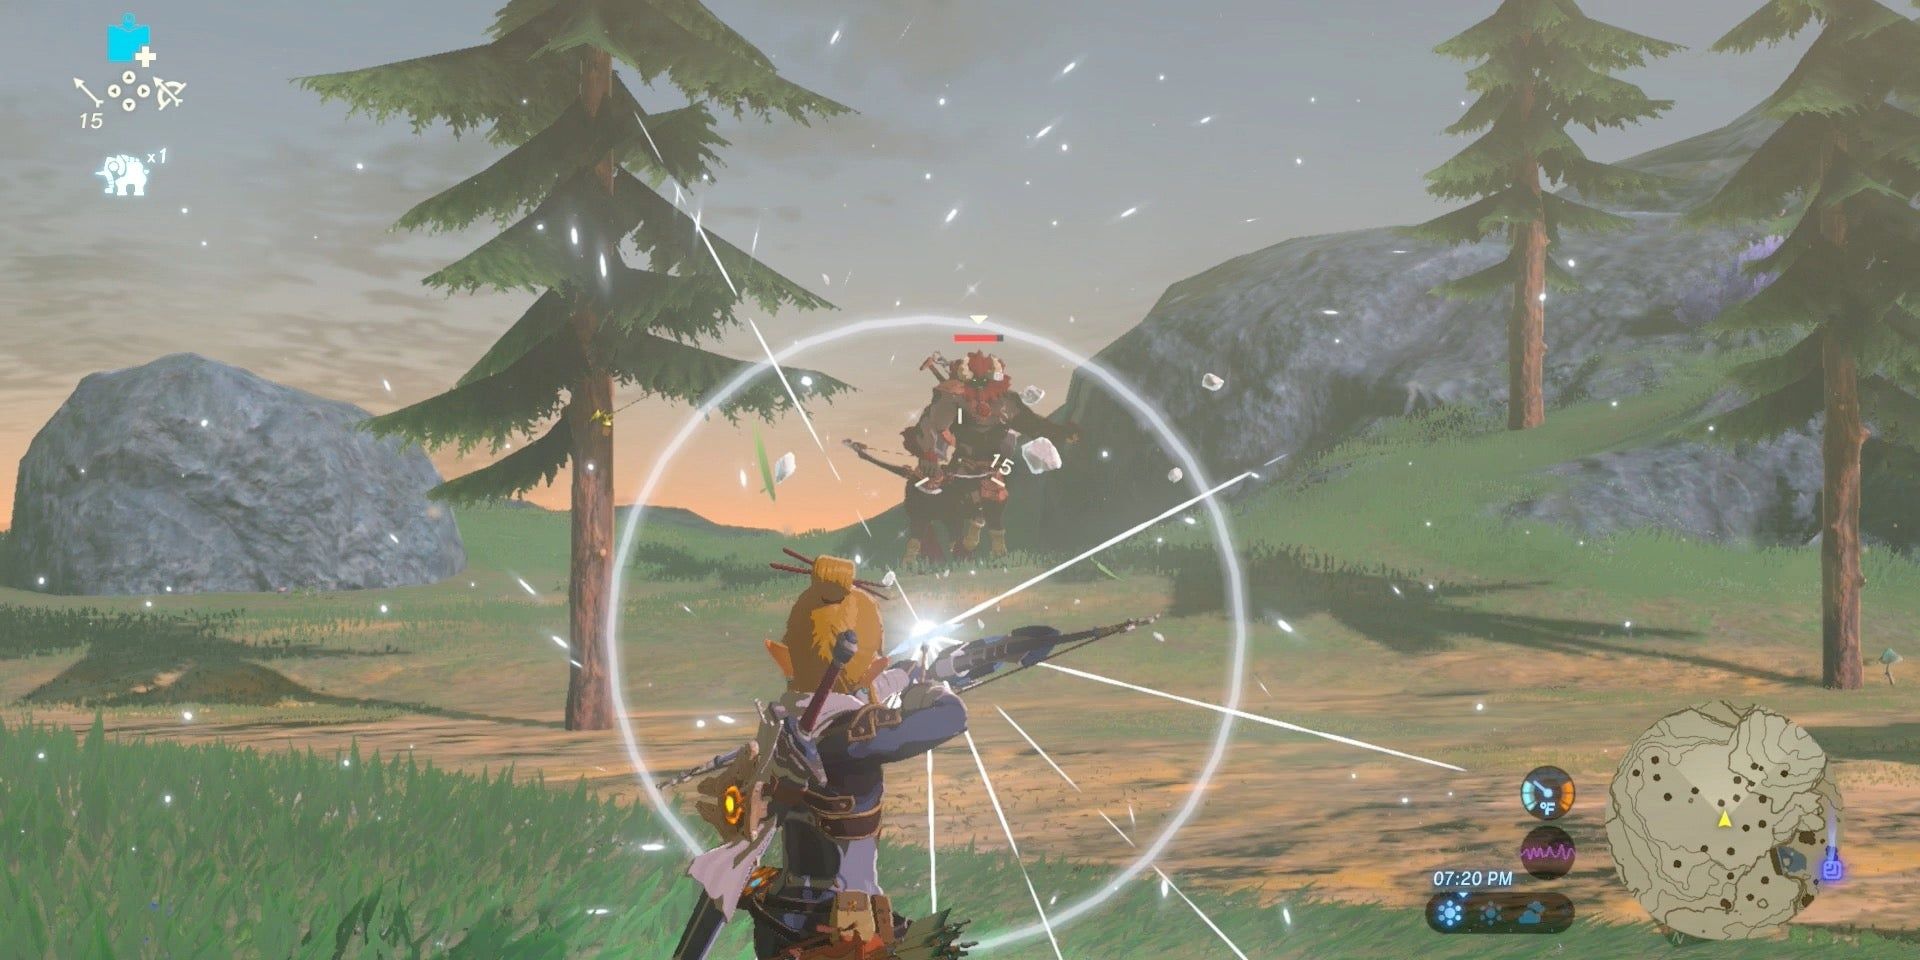 Fighting a Lynel with a bow in Breath of the Wild